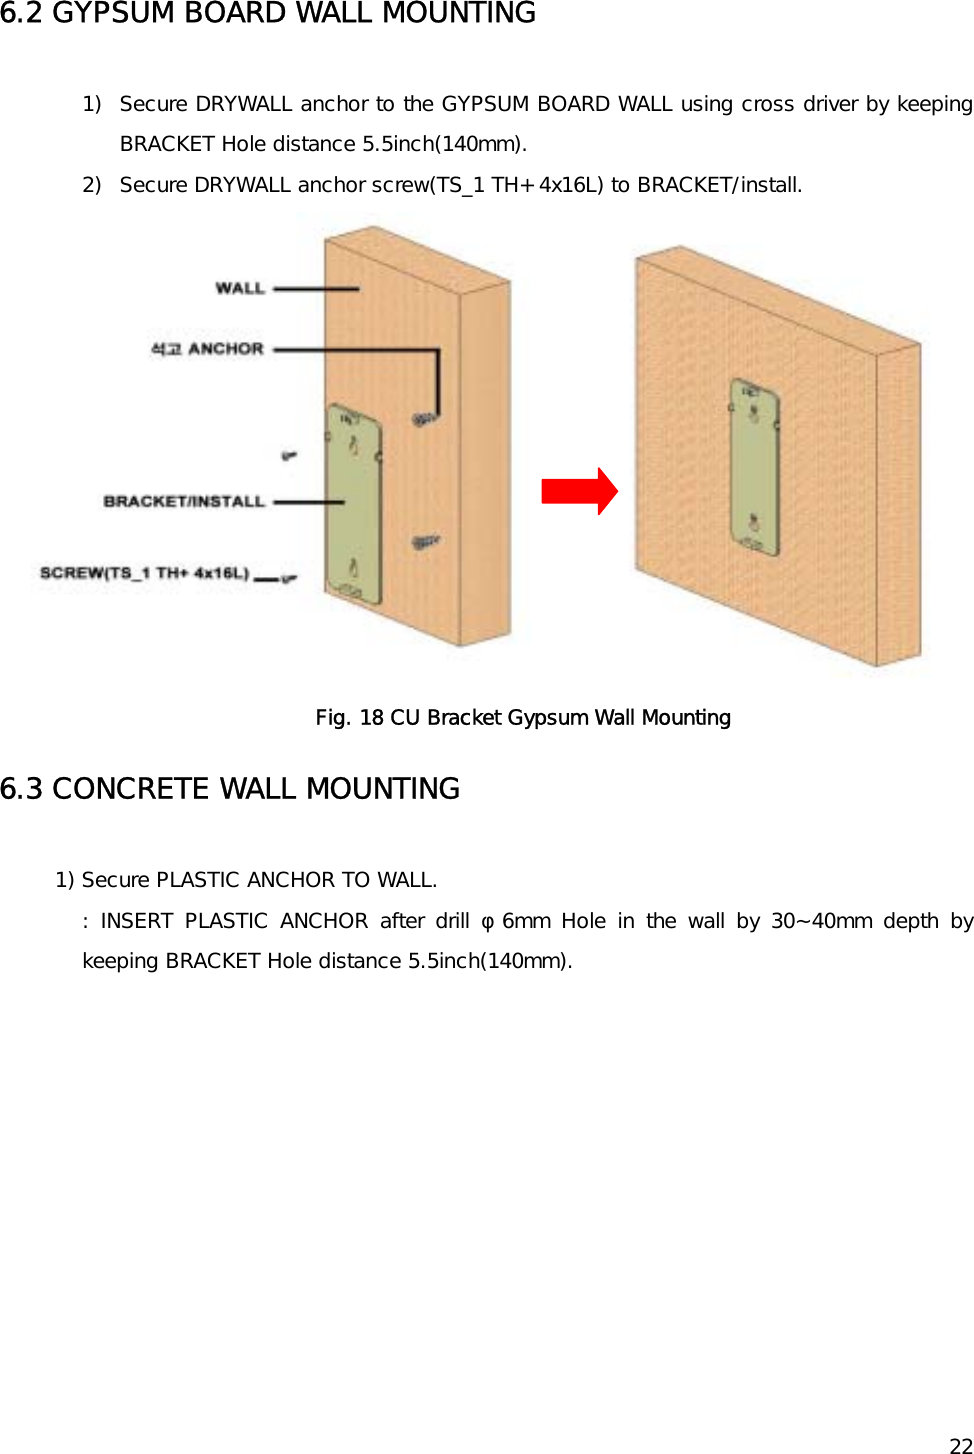    226.2 GYPSUM BOARD WALL MOUNTING  1)  Secure DRYWALL anchor to the GYPSUM BOARD WALL using cross driver by keeping BRACKET Hole distance 5.5inch(140mm). 2)  Secure DRYWALL anchor screw(TS_1 TH+ 4x16L) to BRACKET/install.   Fig. 18 CU Bracket Gypsum Wall Mounting 6.3 CONCRETE WALL MOUNTING  1) Secure PLASTIC ANCHOR TO WALL.  : INSERT PLASTIC ANCHOR after drill φ6mm Hole in the wall by 30~40mm depth by keeping BRACKET Hole distance 5.5inch(140mm).  